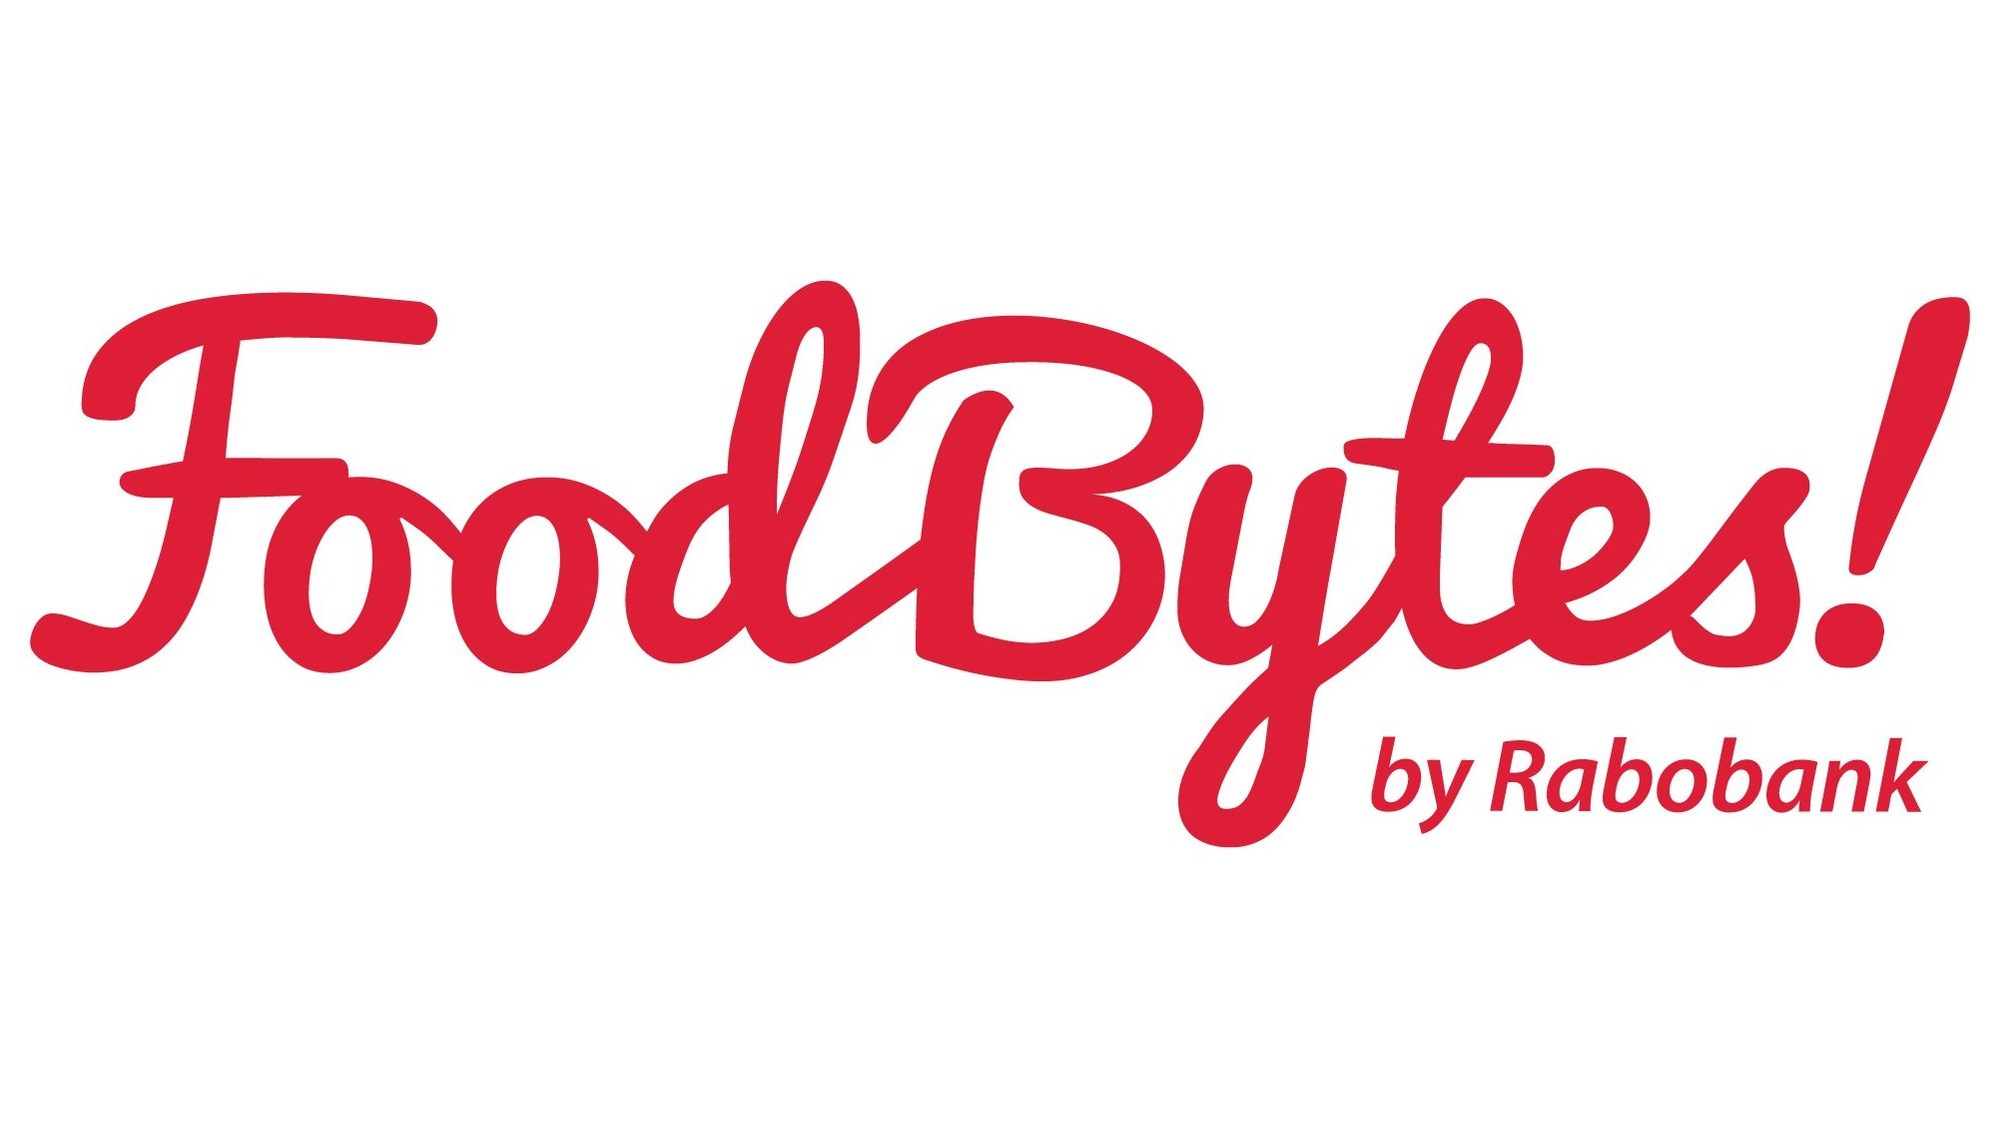 Hypercell Technologies Selected as Standout Startup for FoodBytes! Program 4 Hypercell Technologies Selected as Standout Startup for FoodBytes! Program